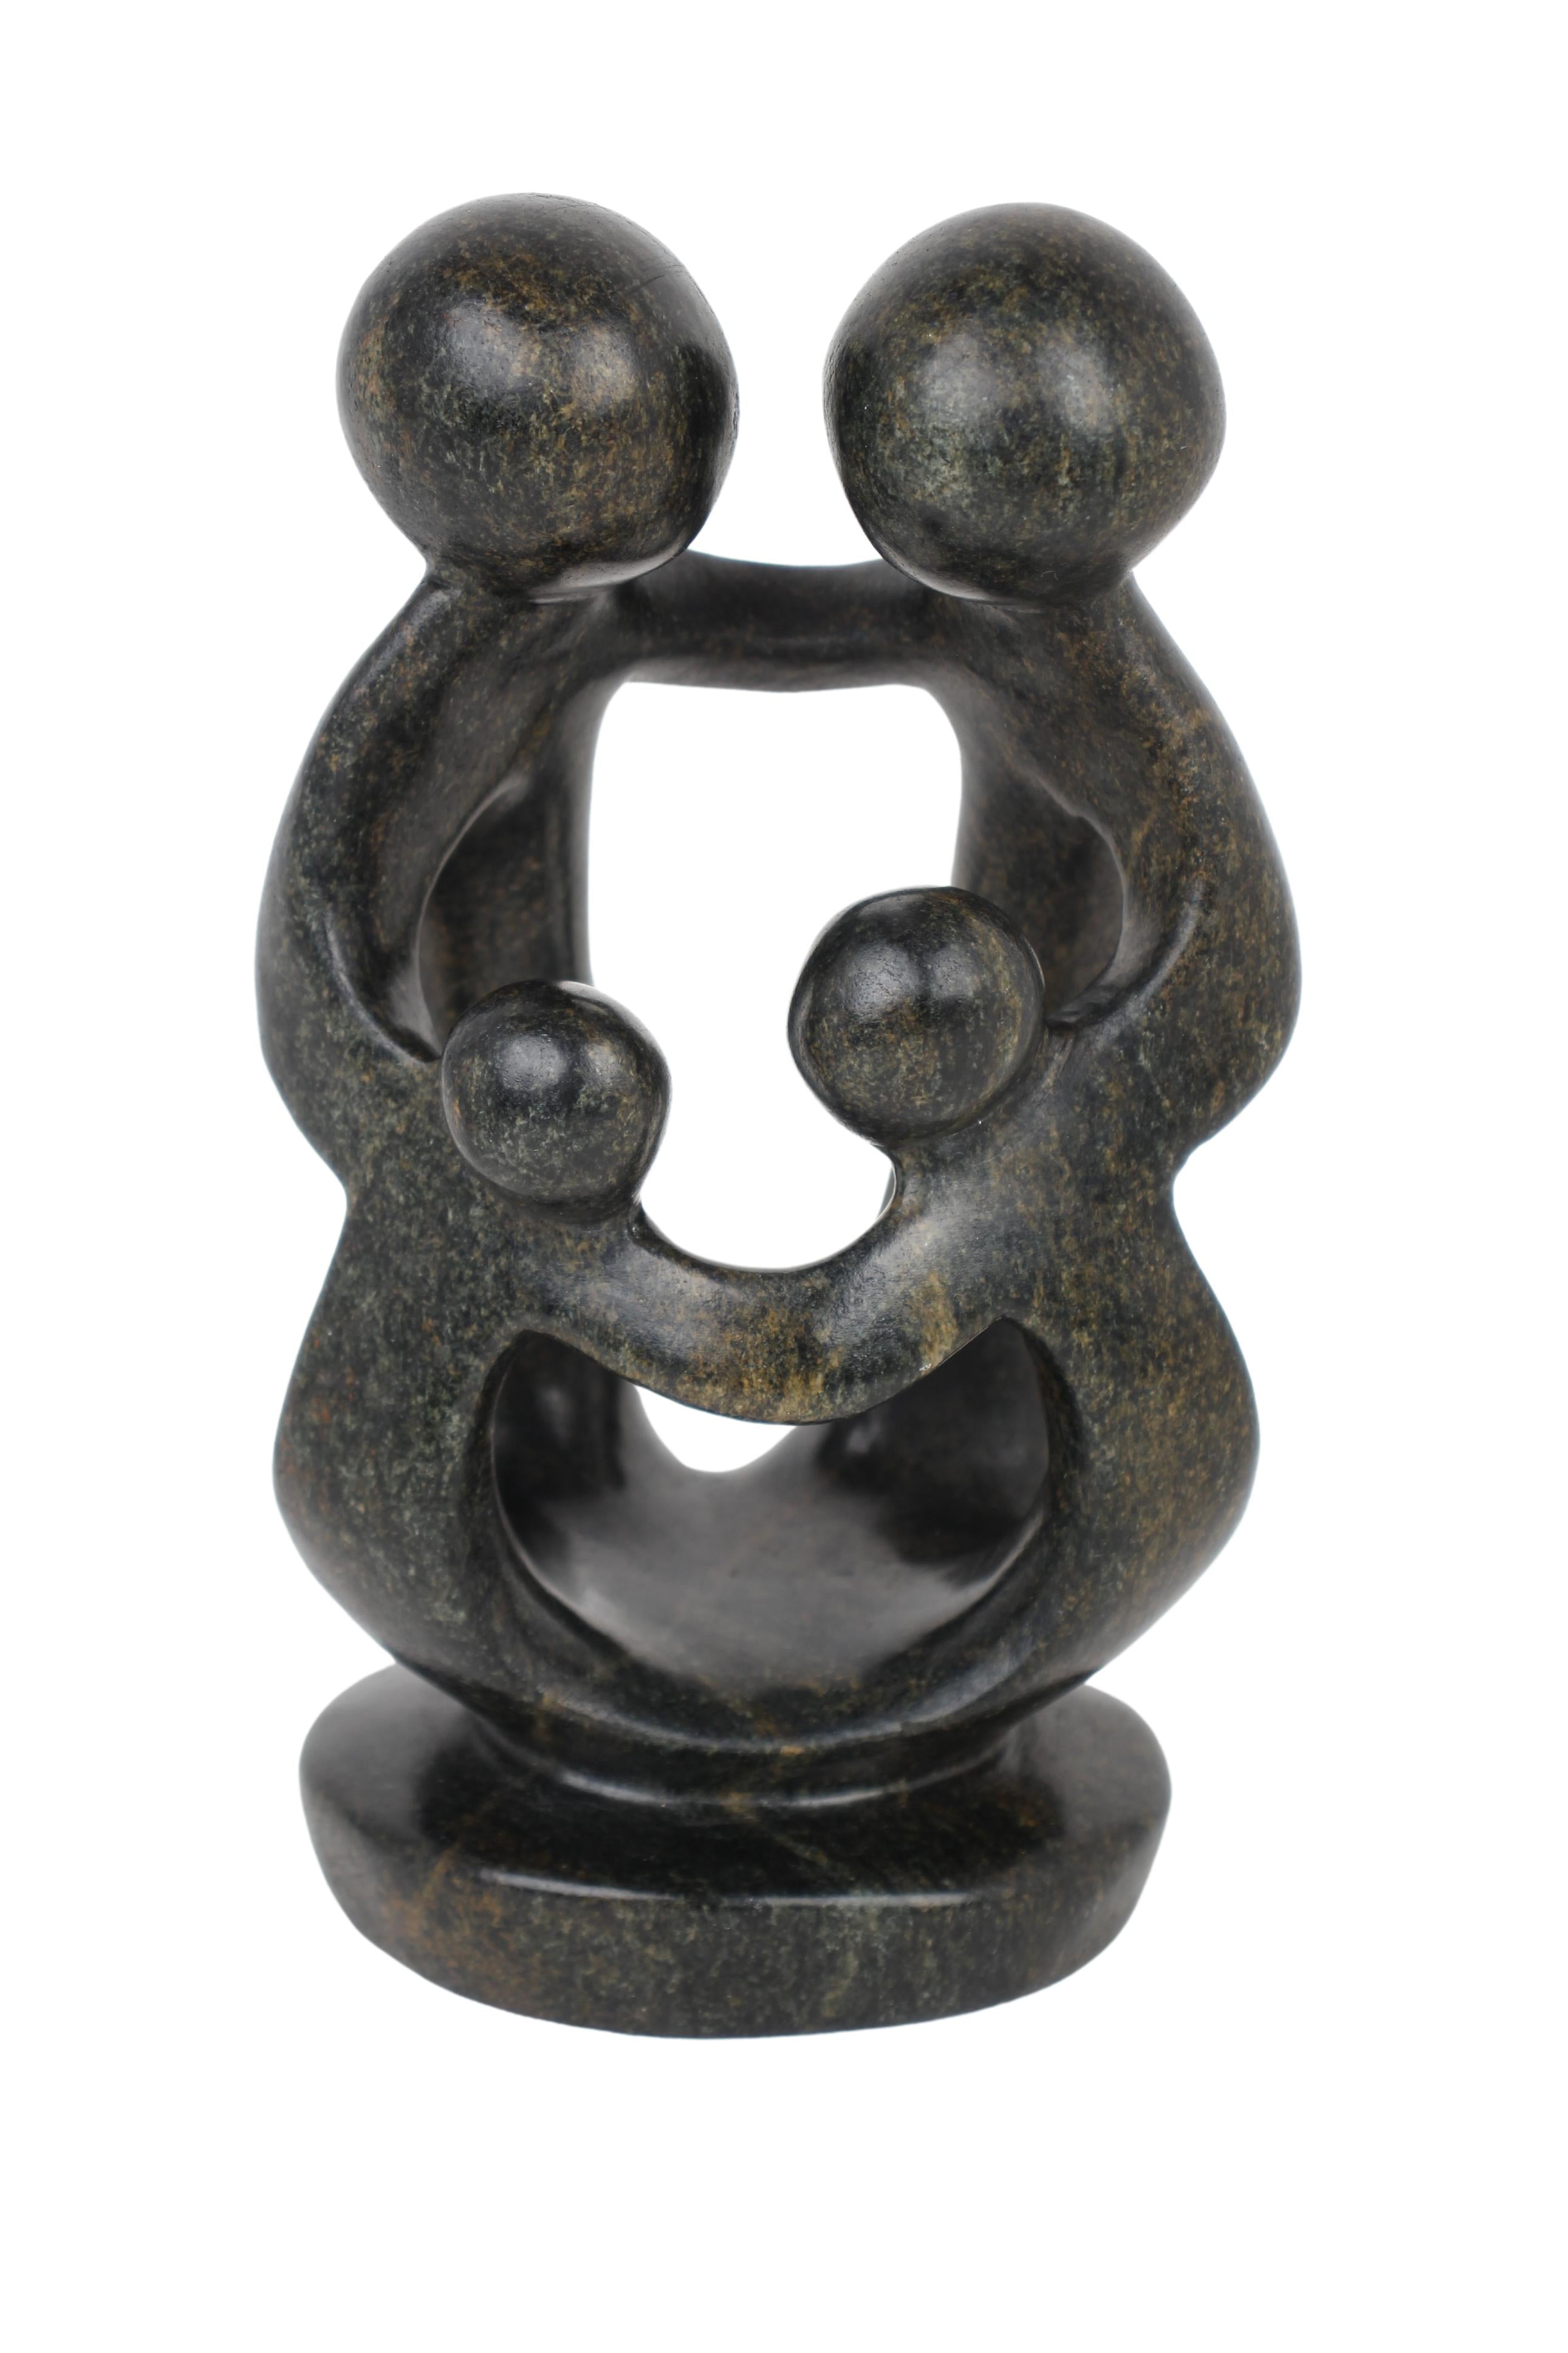 Shona Tribe Serpentine Stone Family of Four ~7.9" Tall (New 2024)